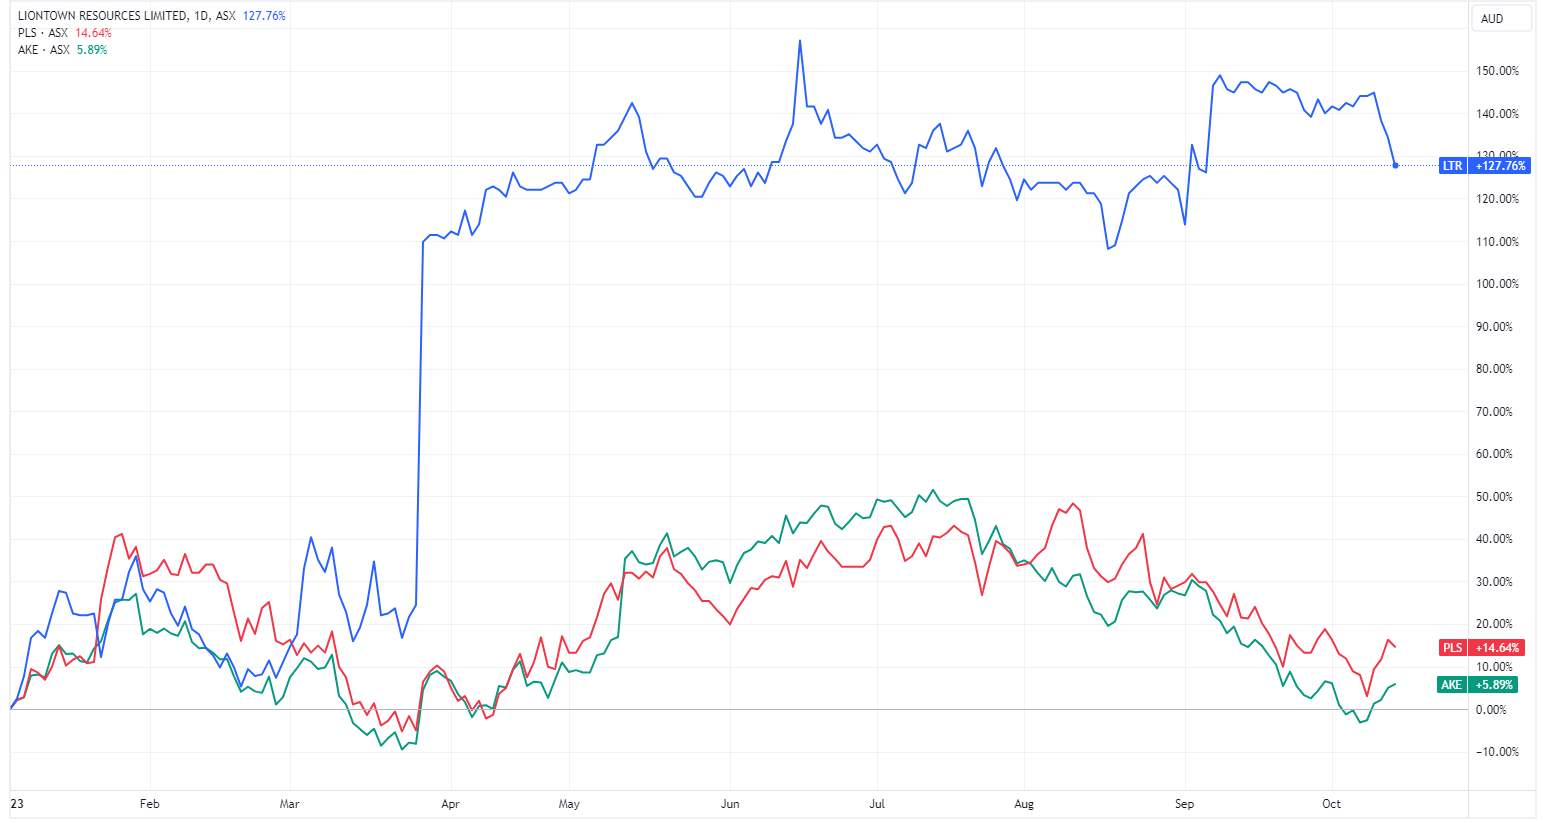 Liontown vs. Allkem and Pilbara Minerals year-to-date chart (Source: TradingView)